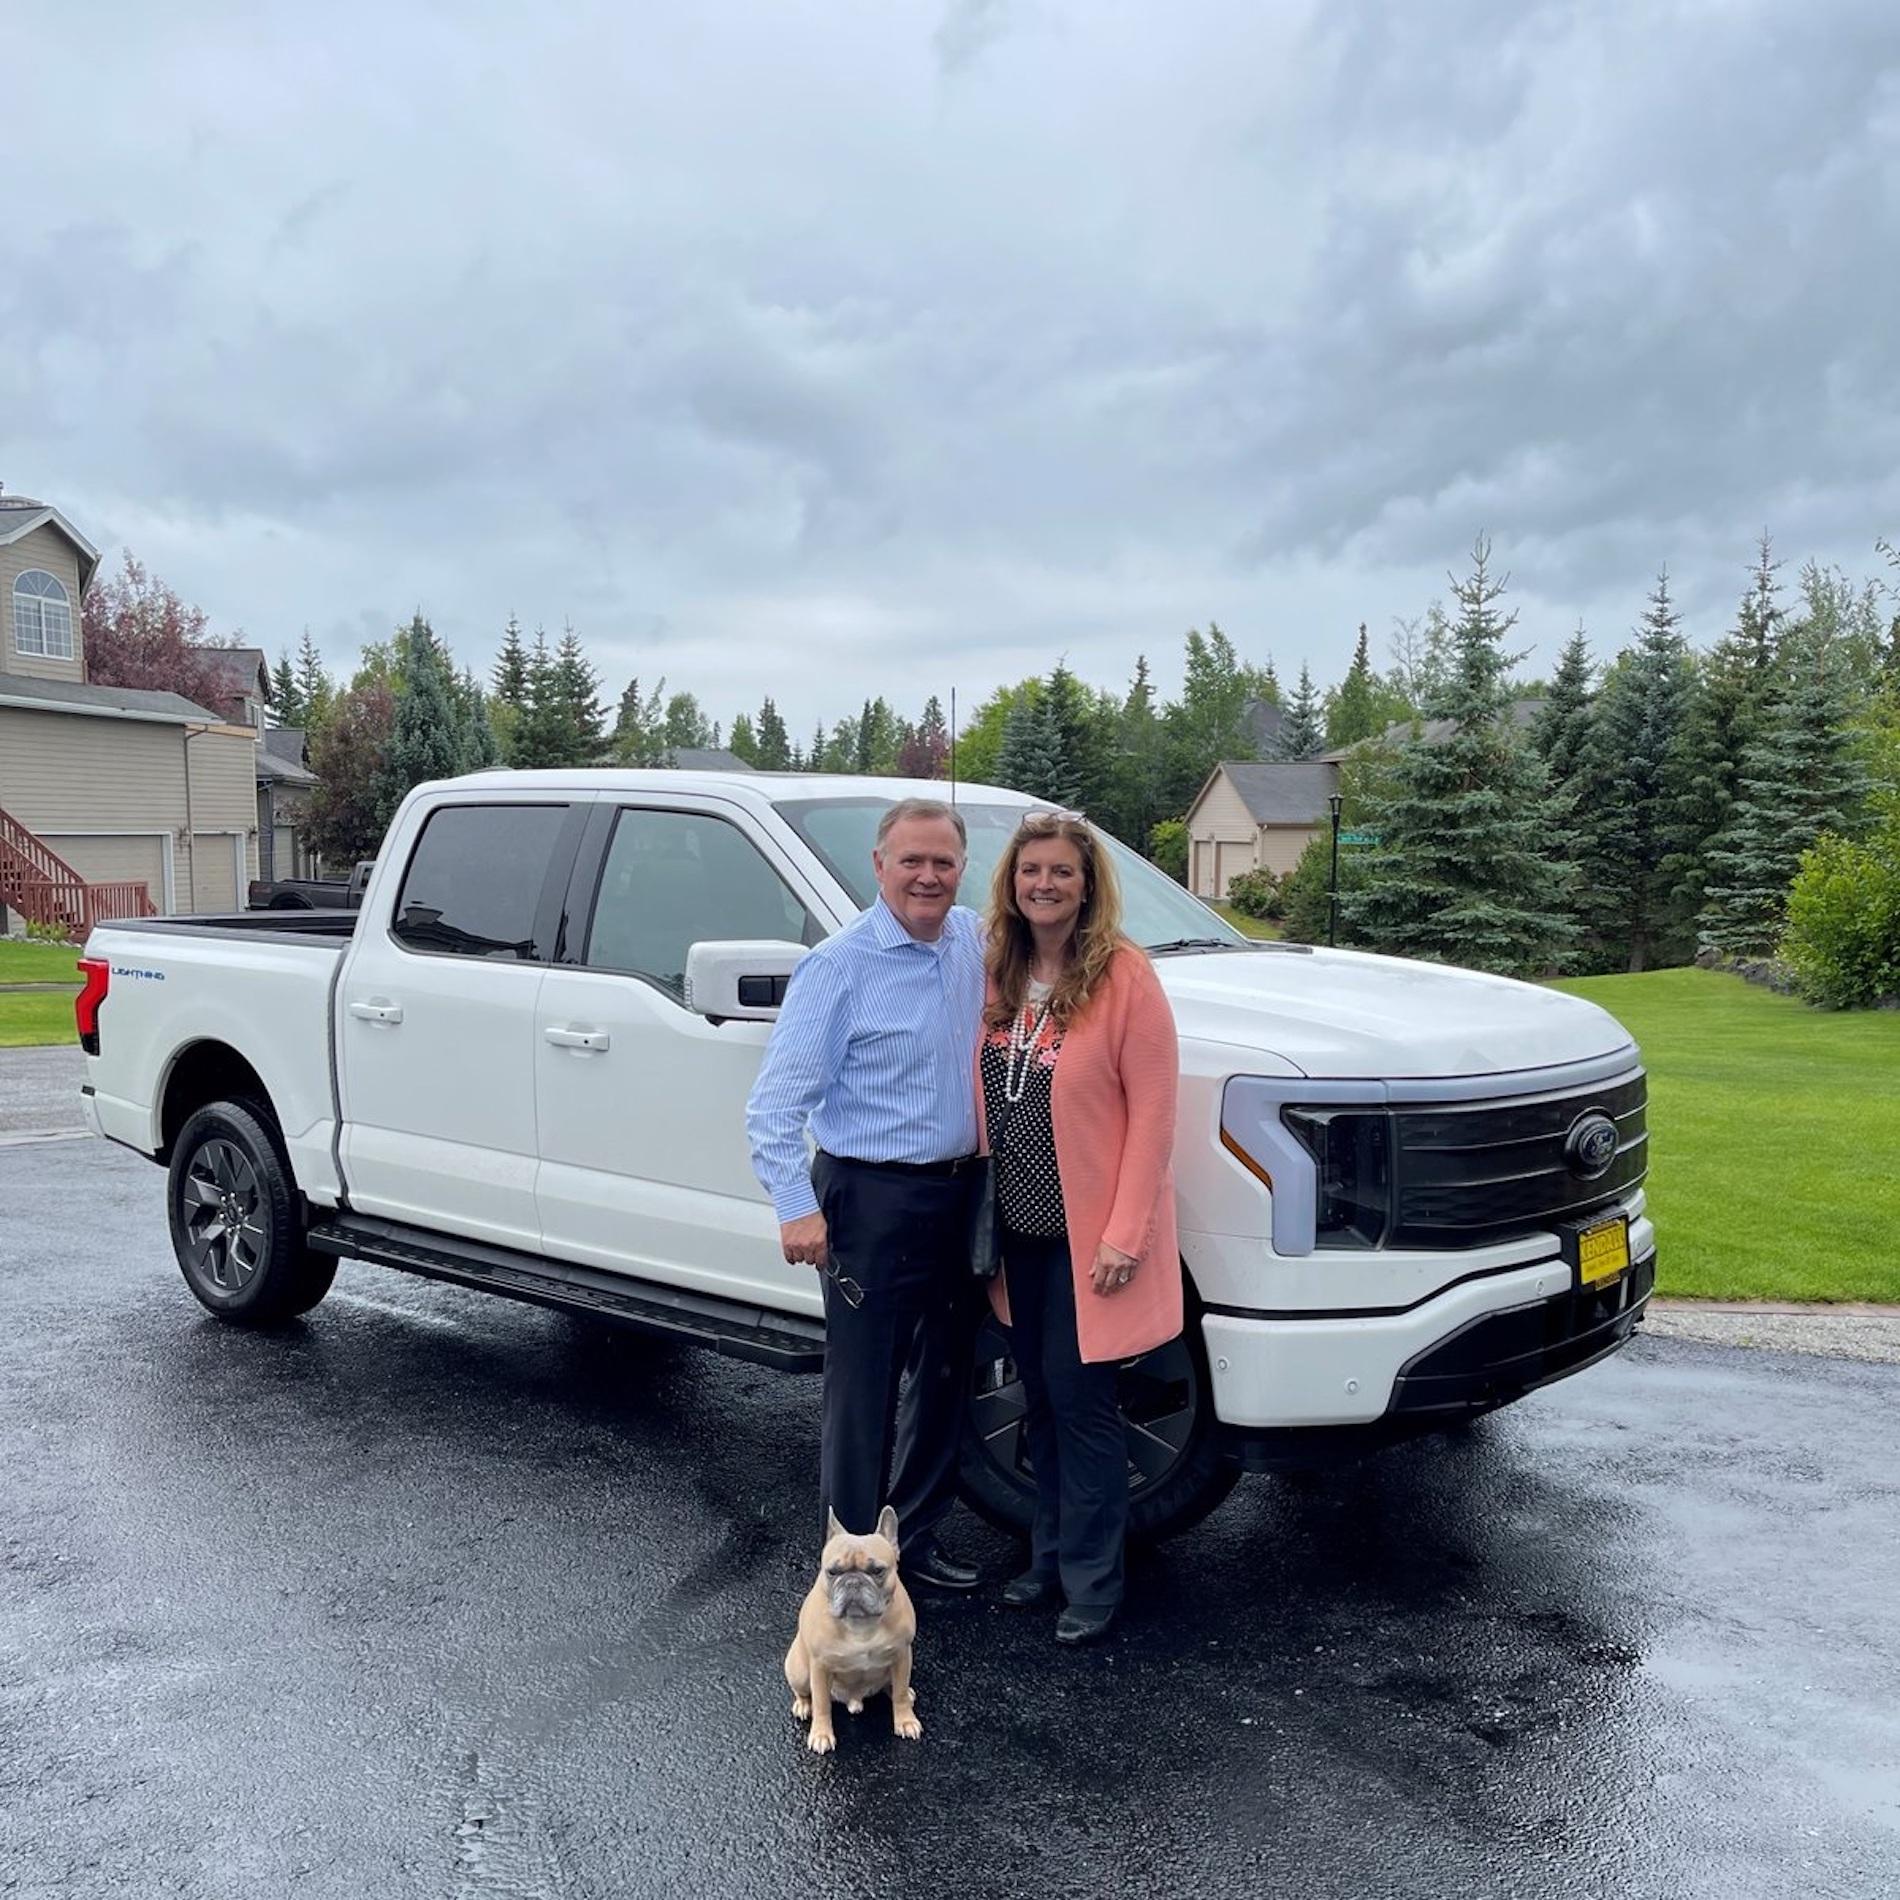 Ford F-150 Lightning Lightning Strikes Across America: Customer Deliveries Now Stretch Across All 50 States Tammy and Jeff in front of truck